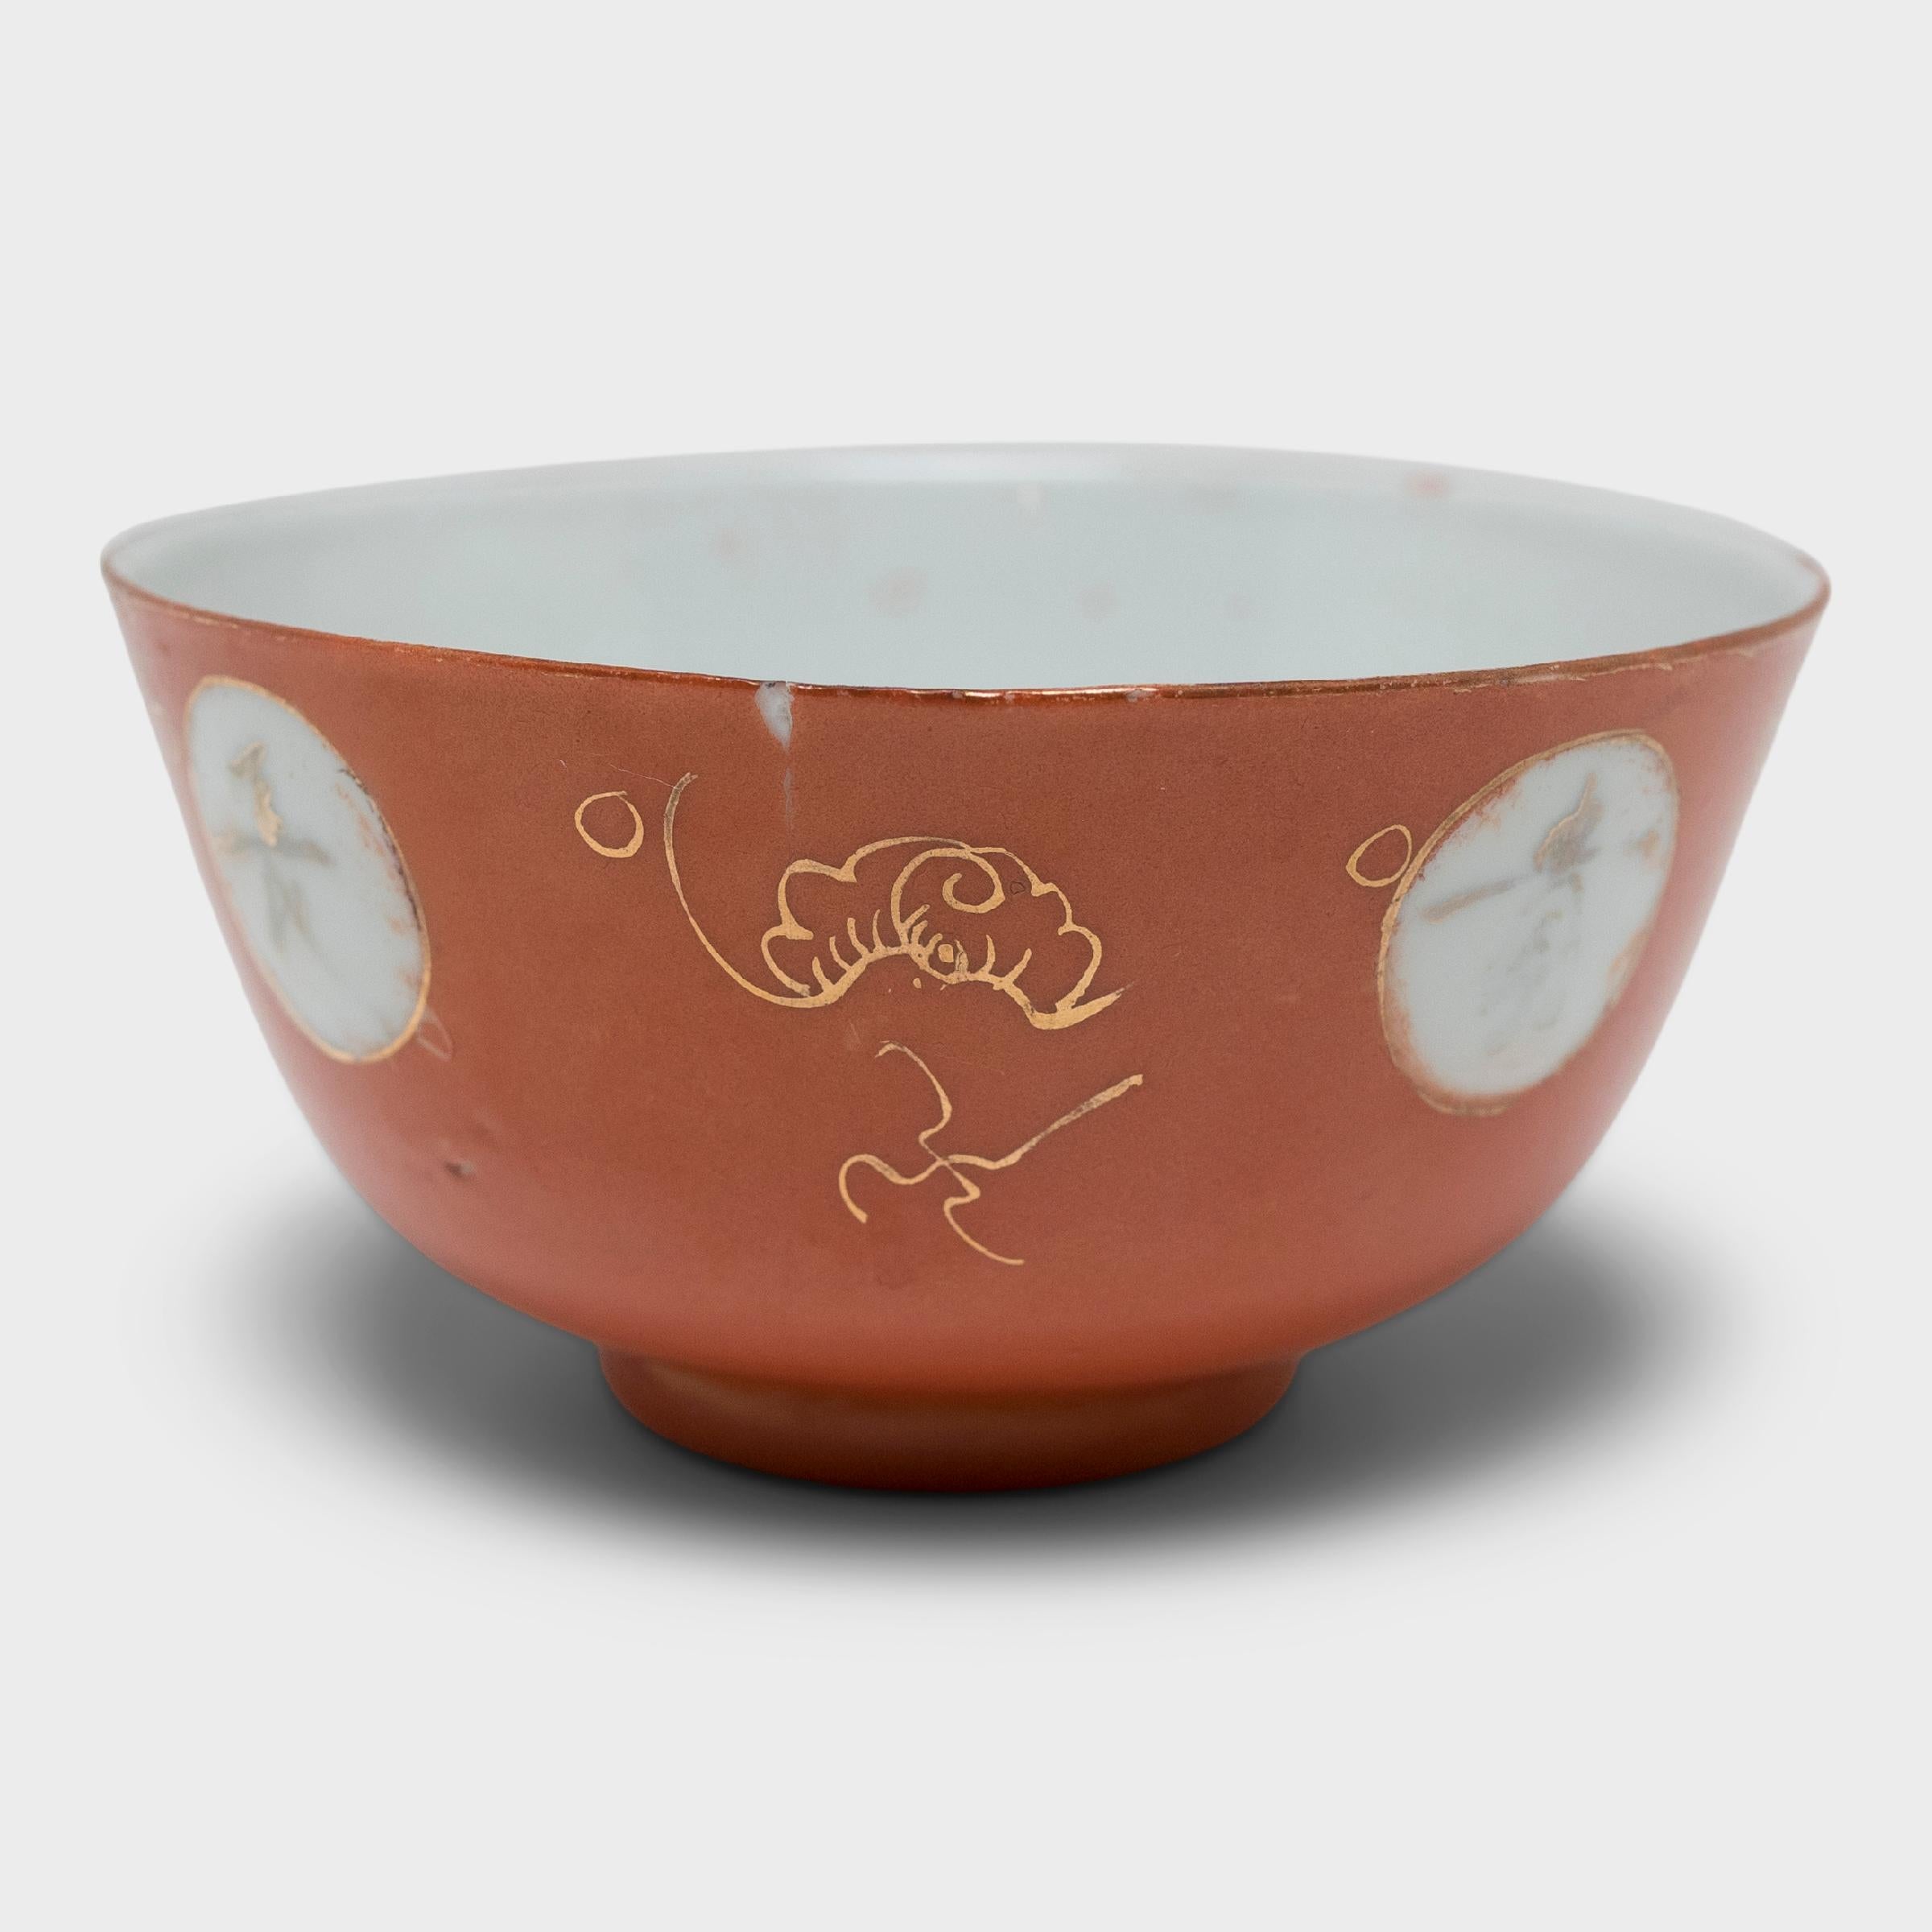 Dated to the Republic period (1912-1949), this bowl is beautifully decorated with a rich, persimmon-orange glaze accented by gilt brushwork. Wrapped around the center of the bowl are four medallions enclosing Chinese calligraphy. Gilt embellishments